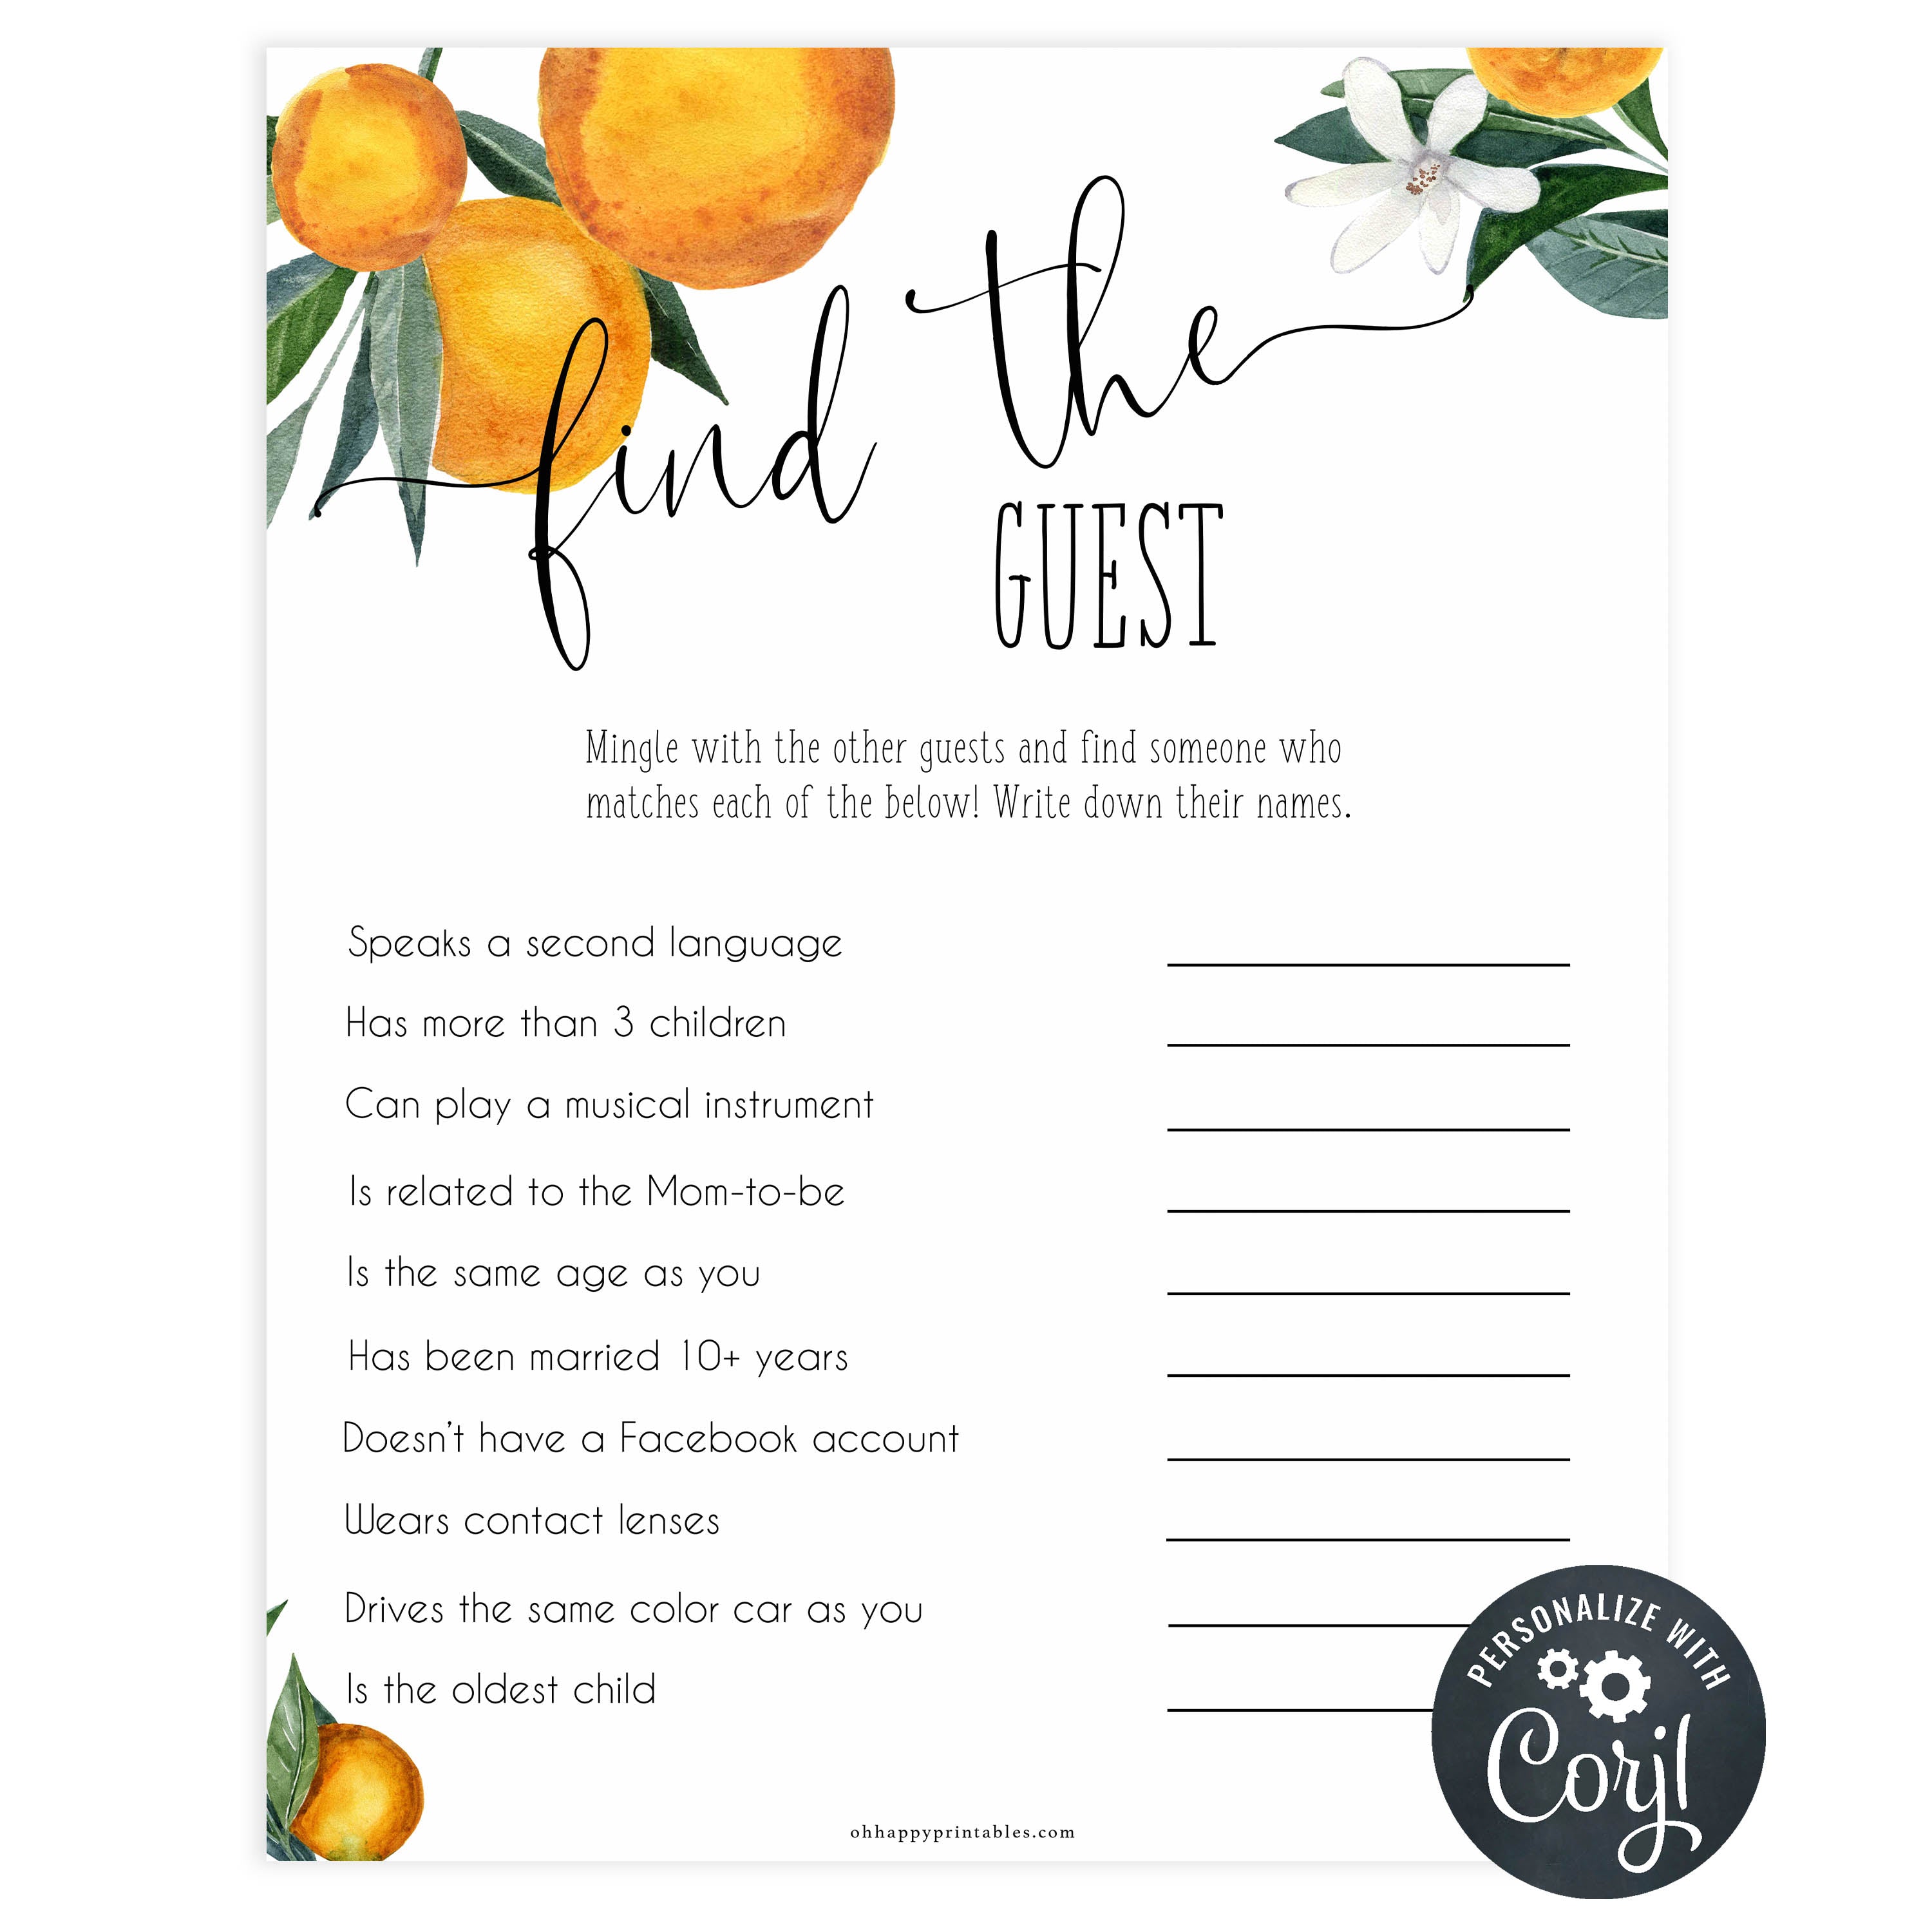 find the guest baby shower game, Printable baby shower games, little cutie baby games, baby shower games, fun baby shower ideas, top baby shower ideas, little cutie baby shower, baby shower games, fun little cutie baby shower ideas, citrus baby shower games, citrus baby shower, orange baby shower